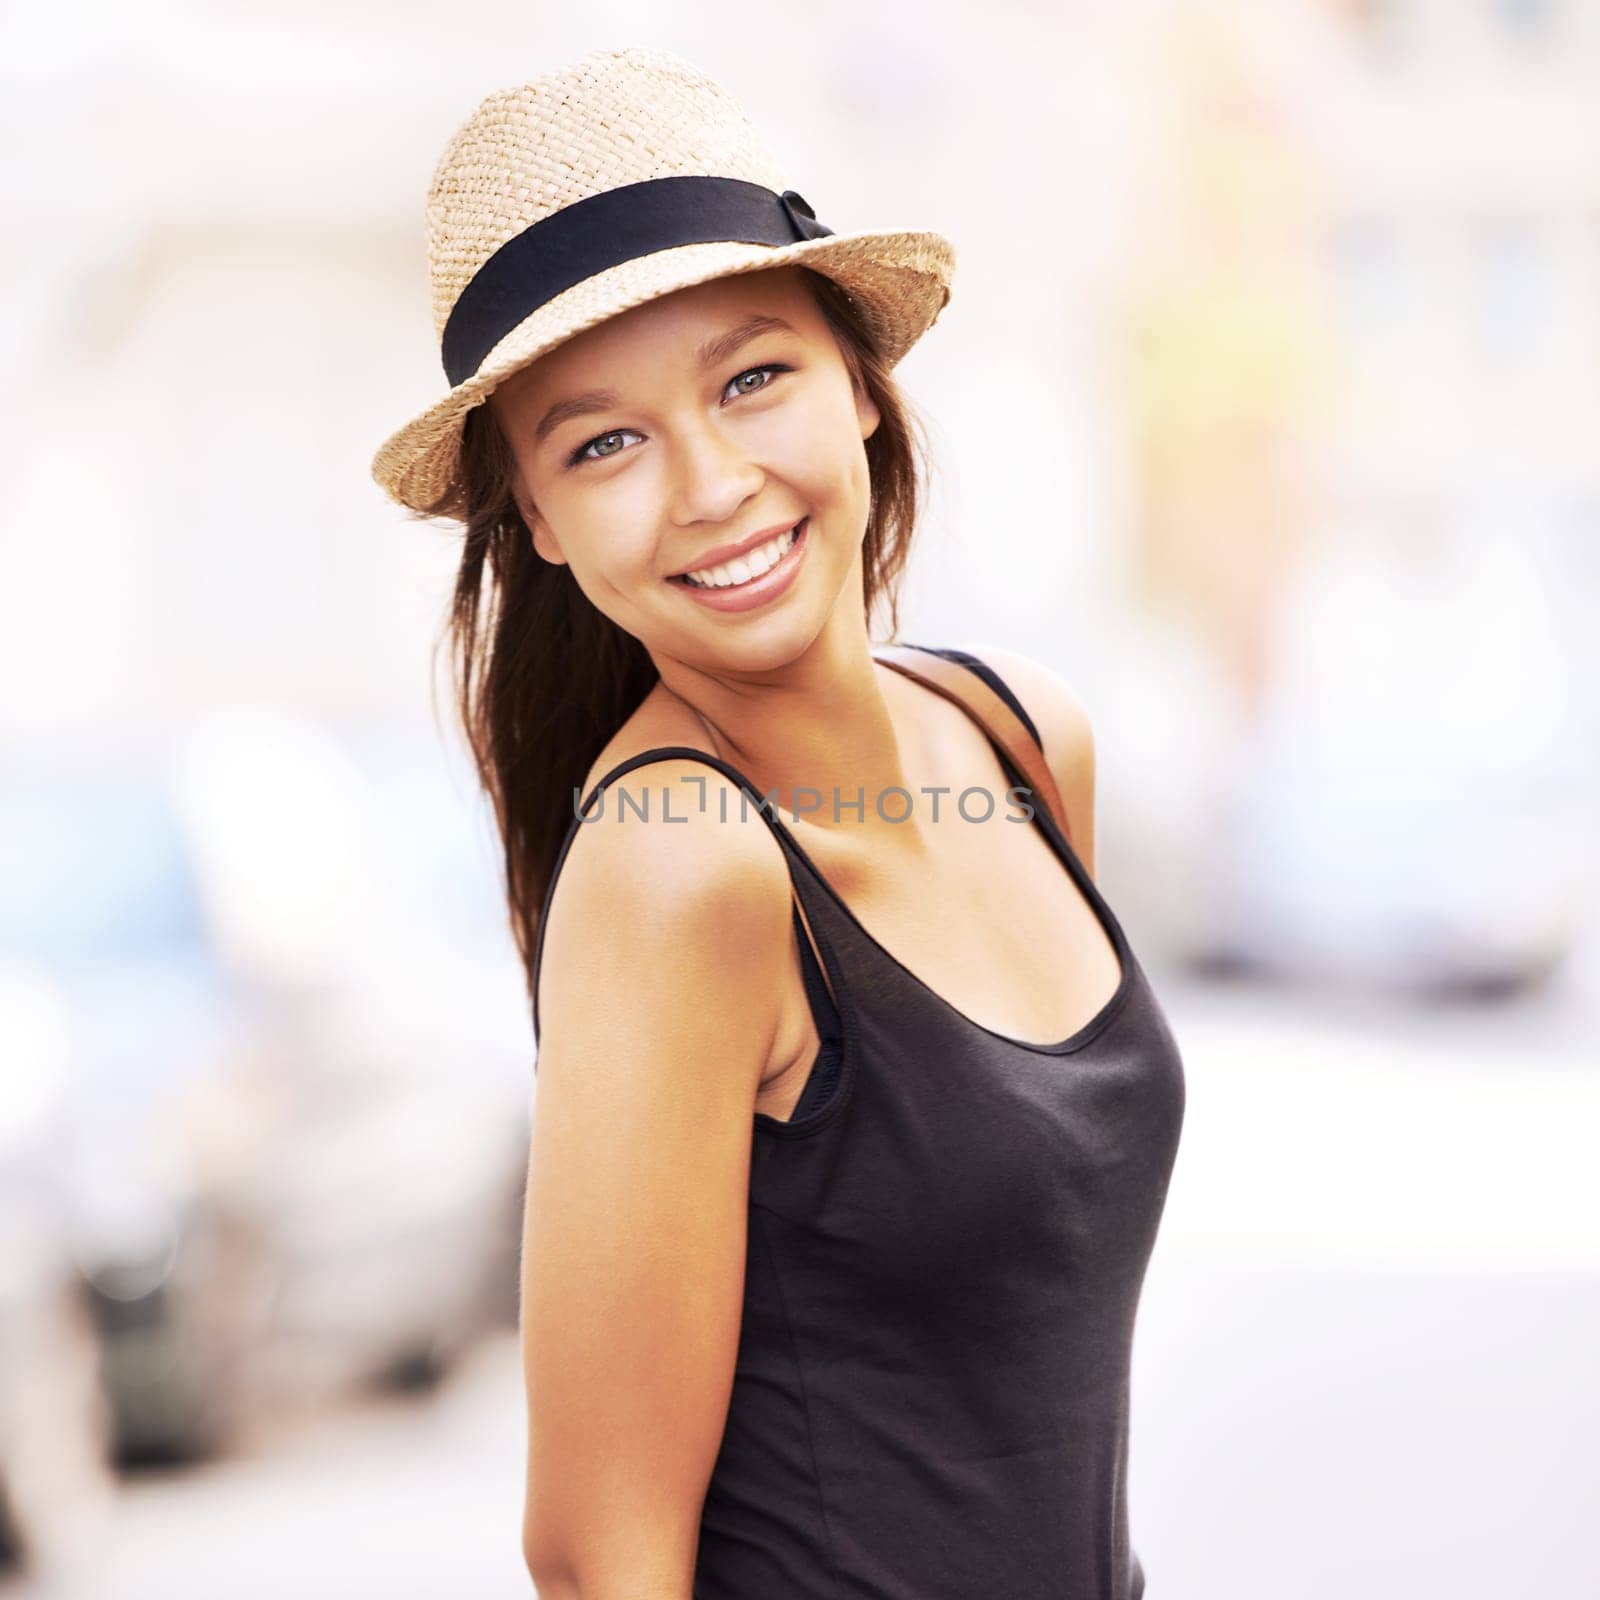 Woman, portrait and fashion or street travel style, summer look for weekend vacation. Female person, tourist and face hat for sunshine city road walking or outdoor adventure, relax or holiday clothes.